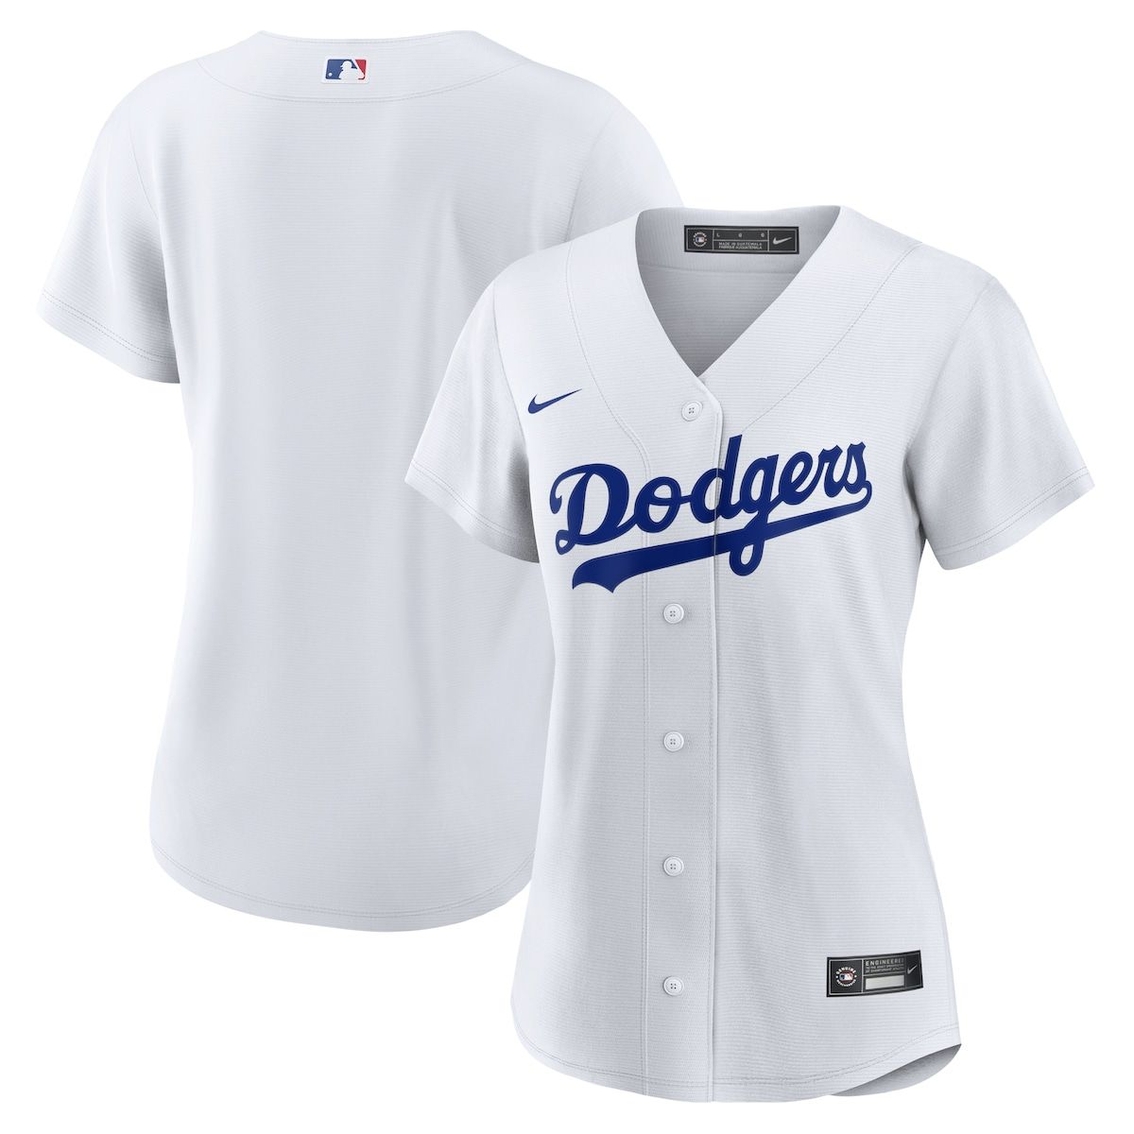 Nike Women's White Los Angeles Dodgers Home Replica Team Jersey - Image 2 of 4